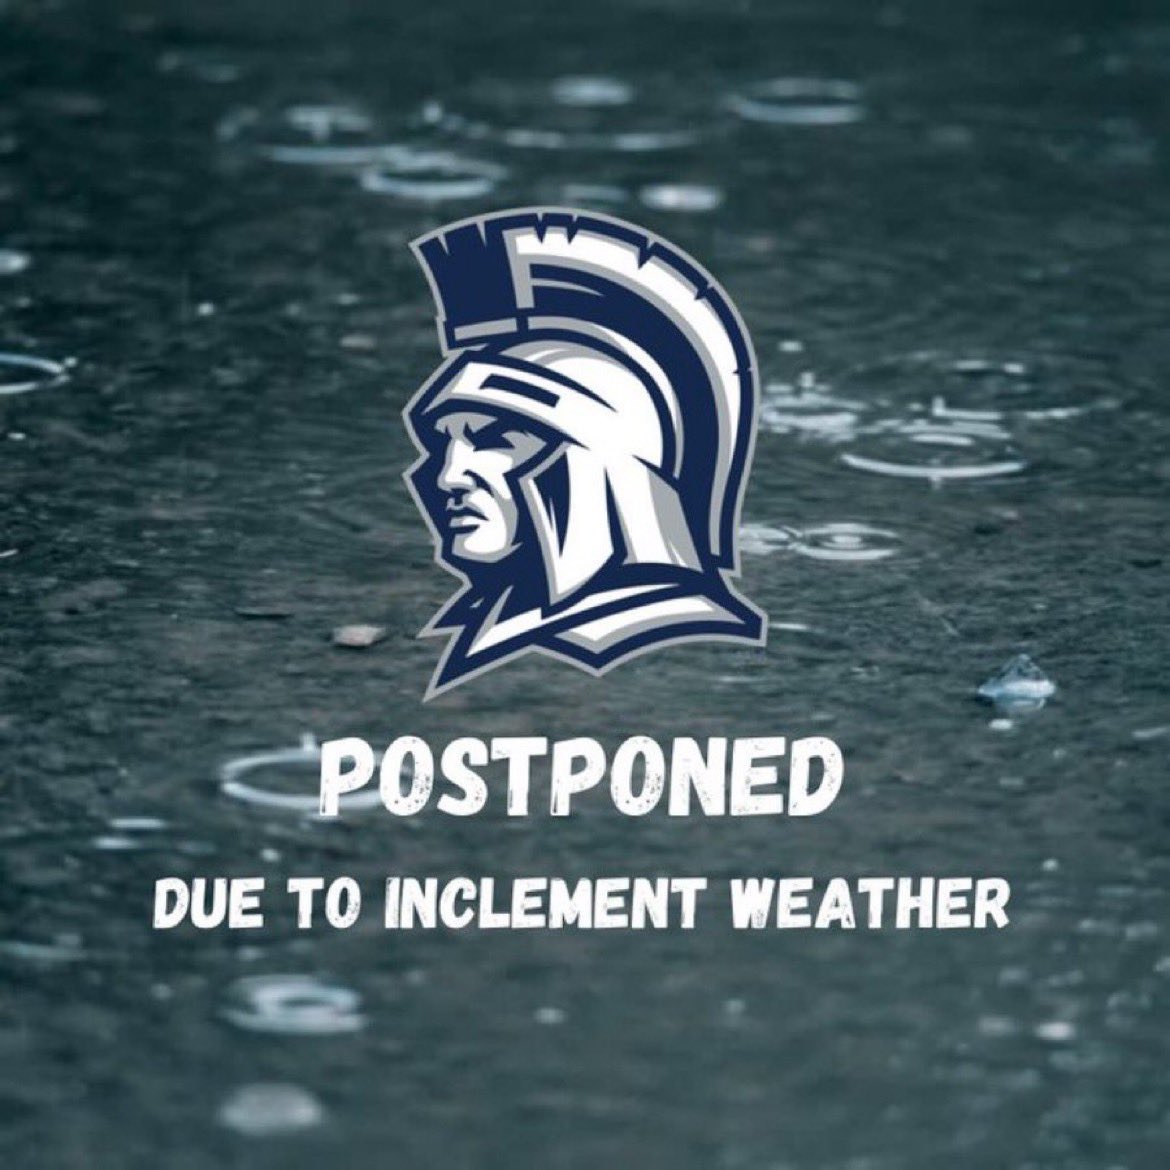 Today’s Tennis match at Mifflin County is postponed.